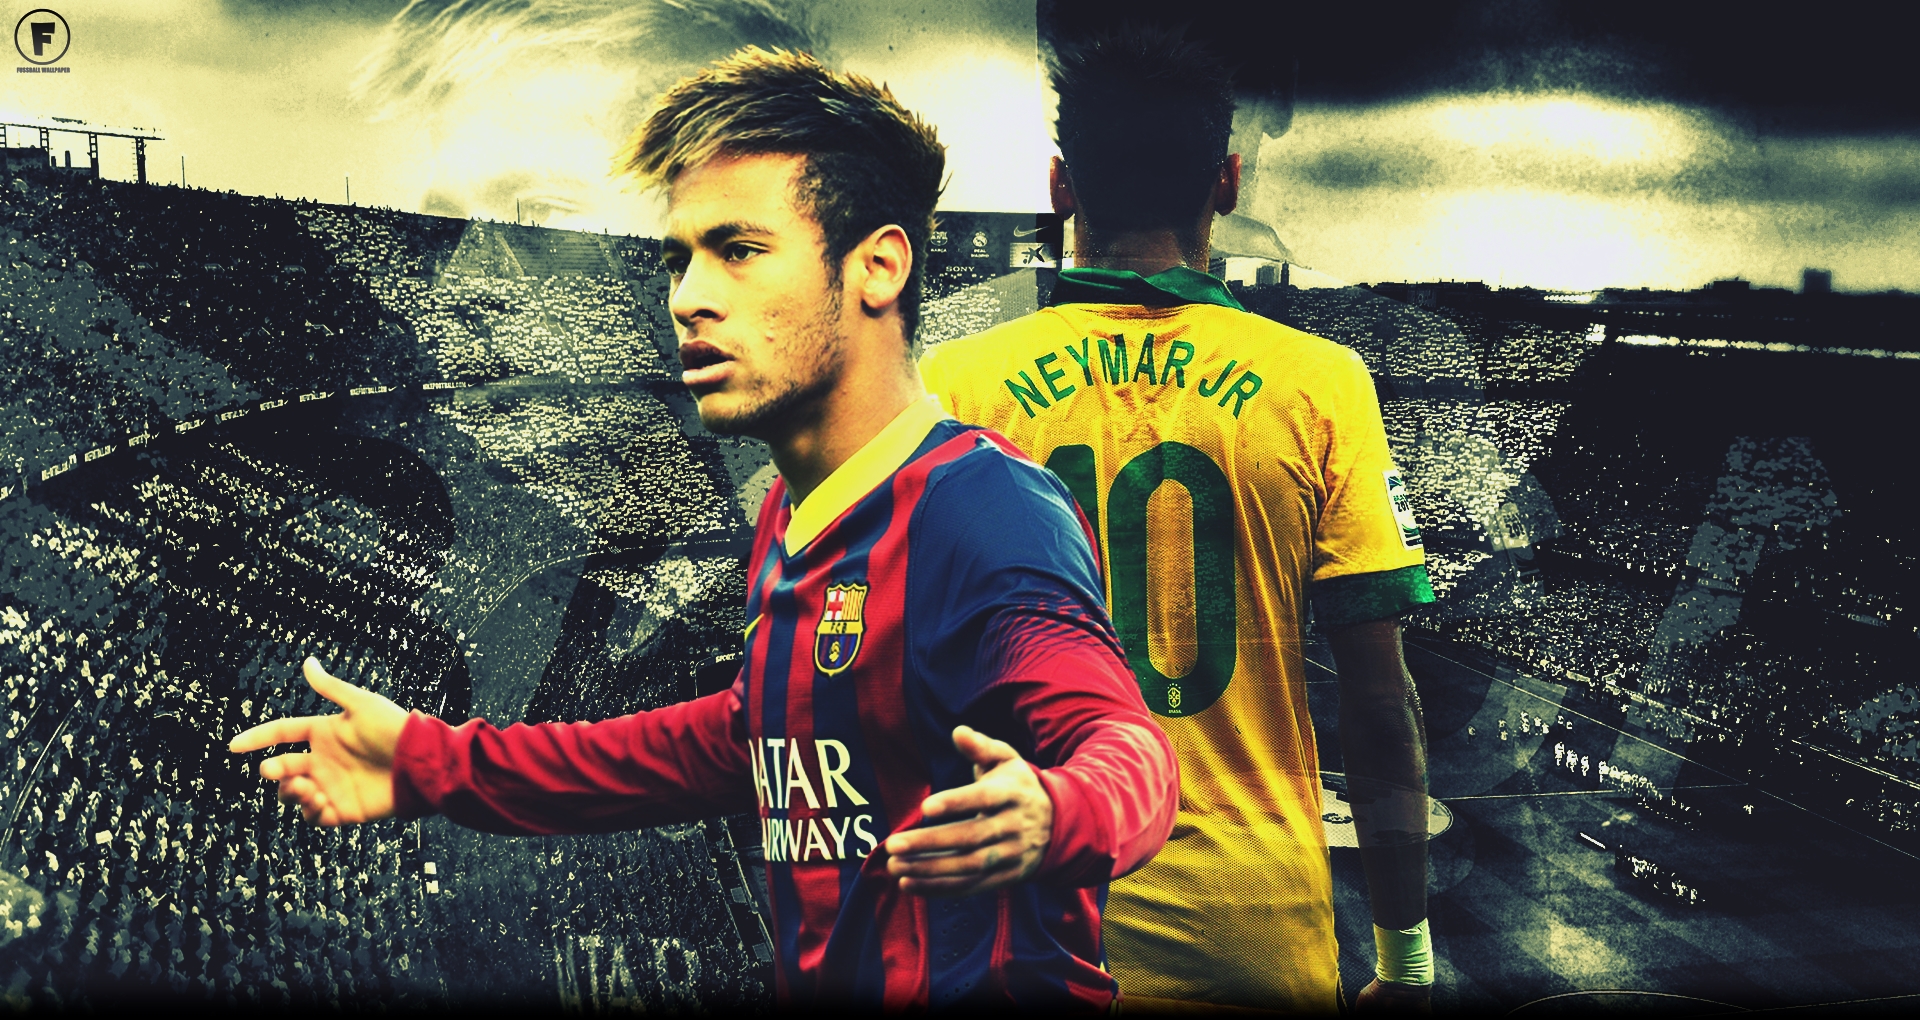 Neymar Wallpaper Top Collections Of Pictures Image